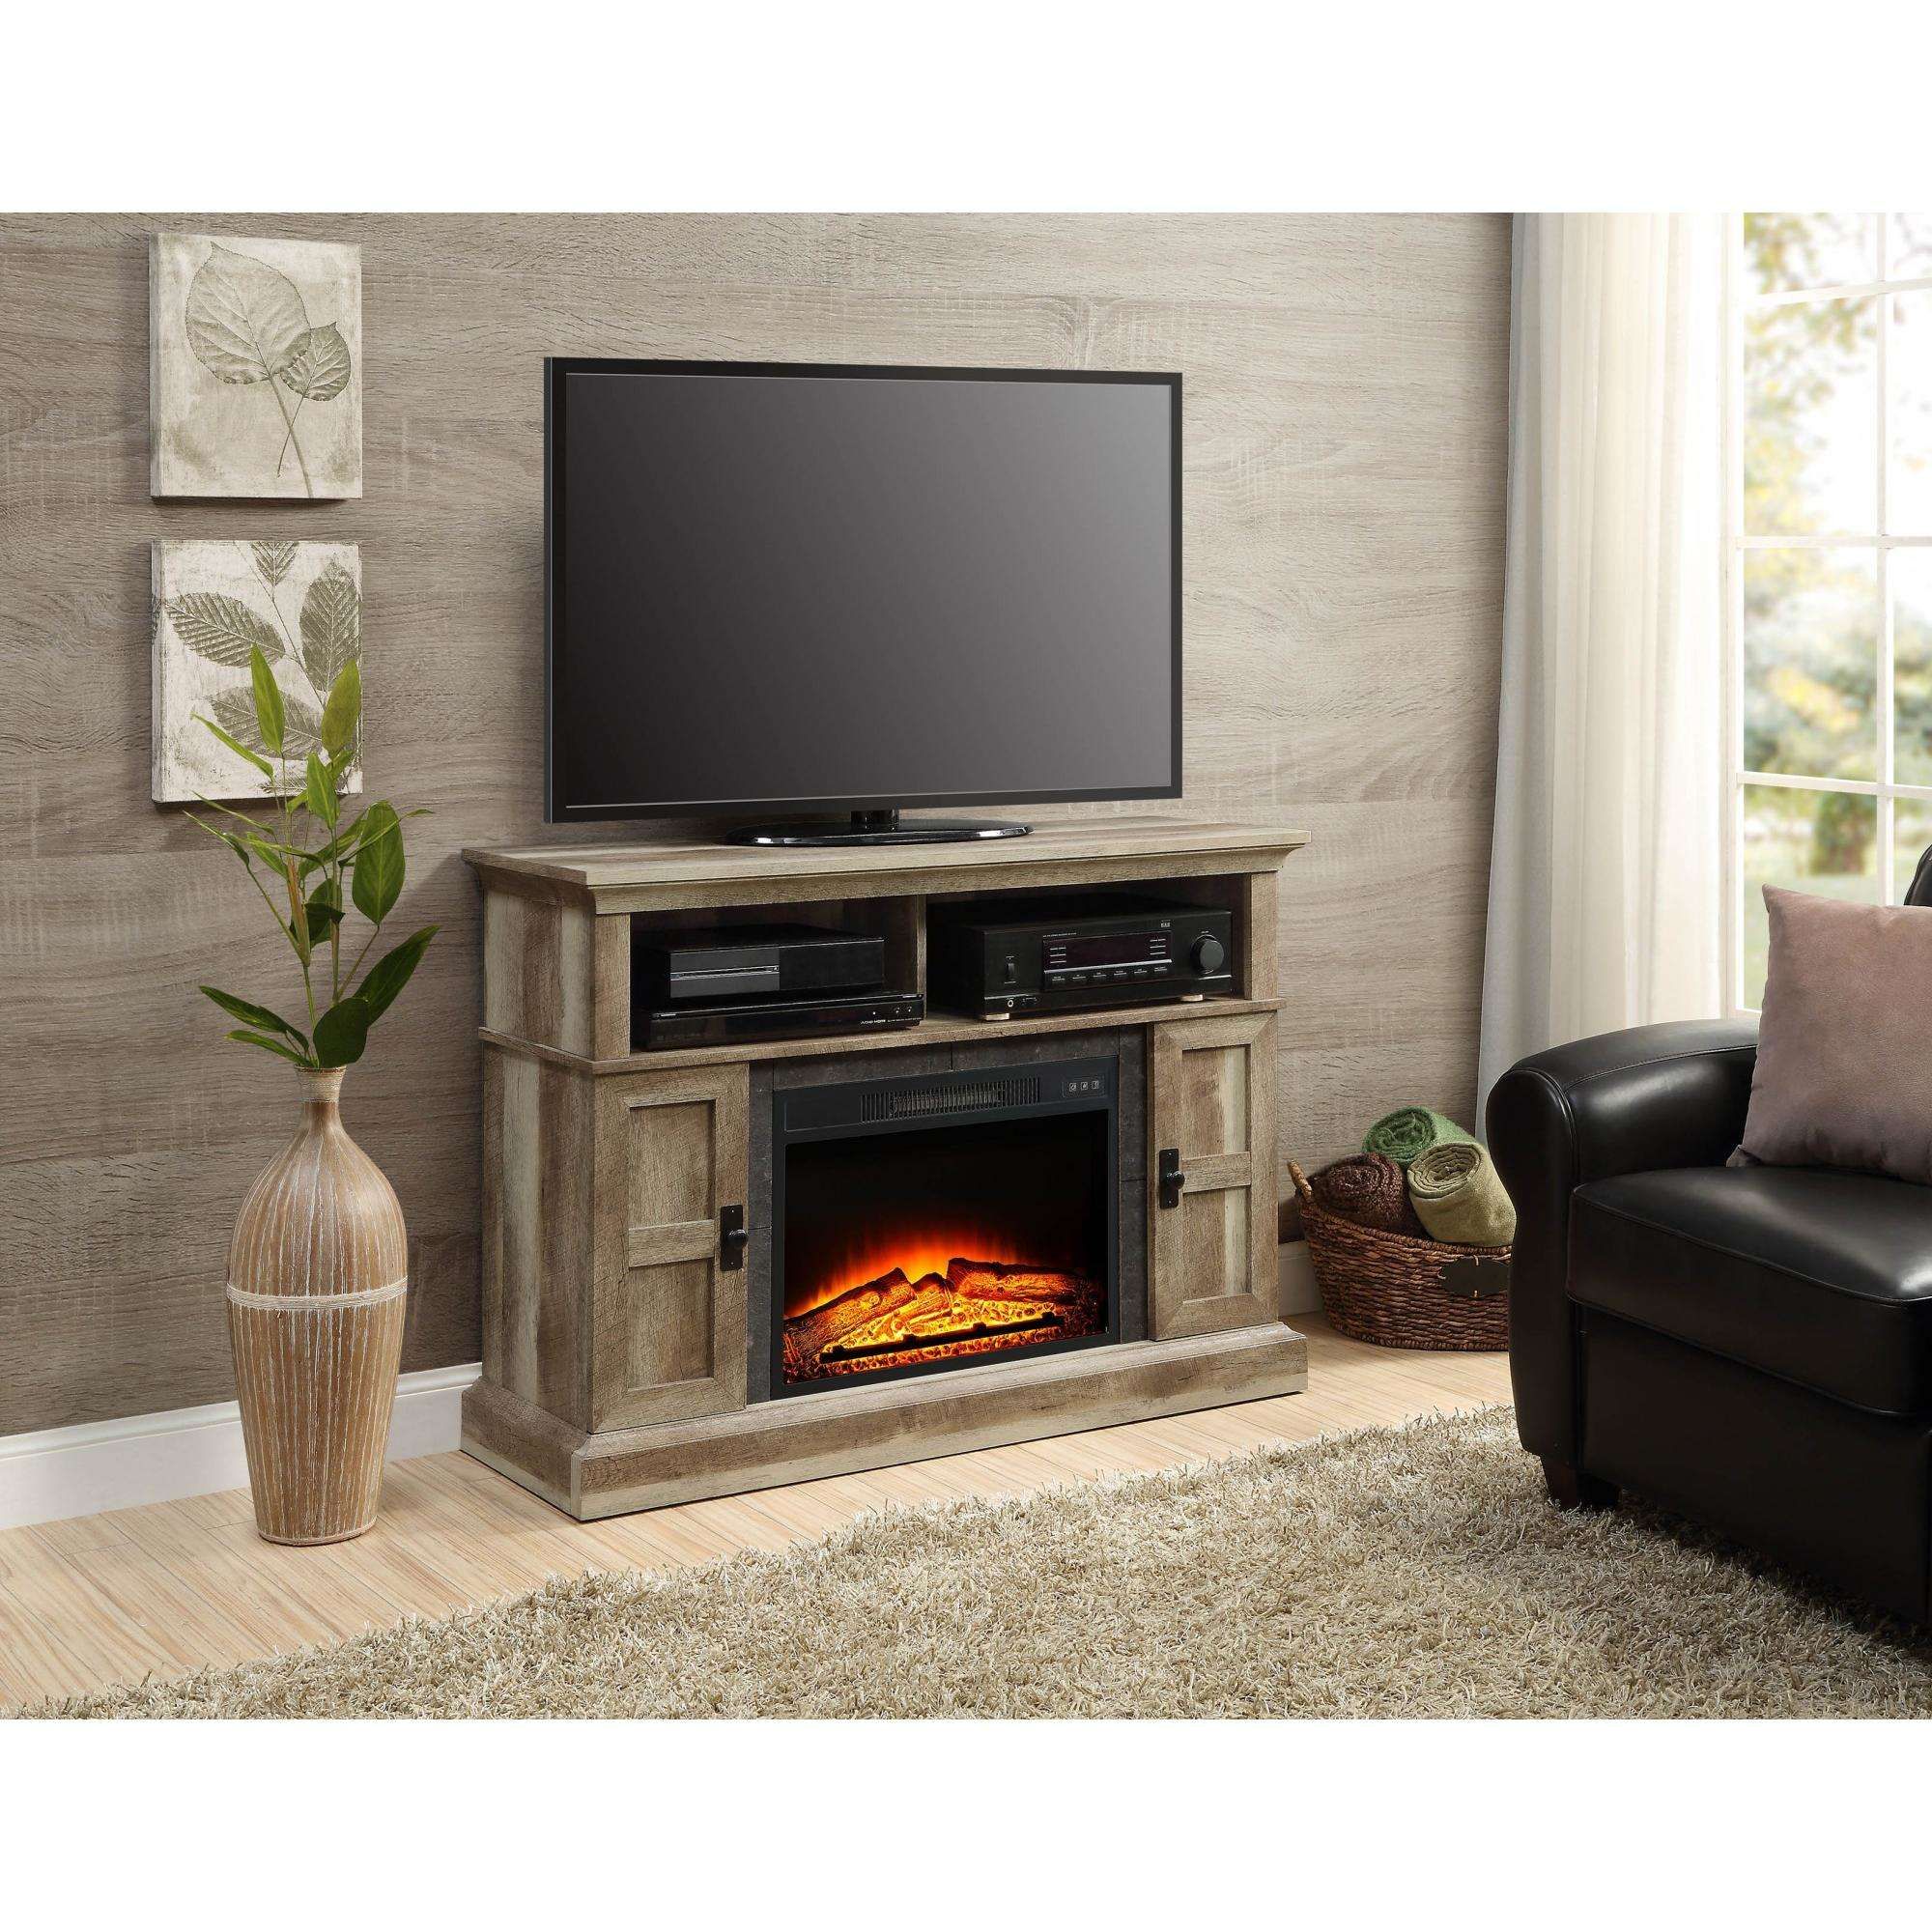 Fireplace Tv Stand Near Me Elegant Whalen Media Fireplace for Your Home Television Stand Fits